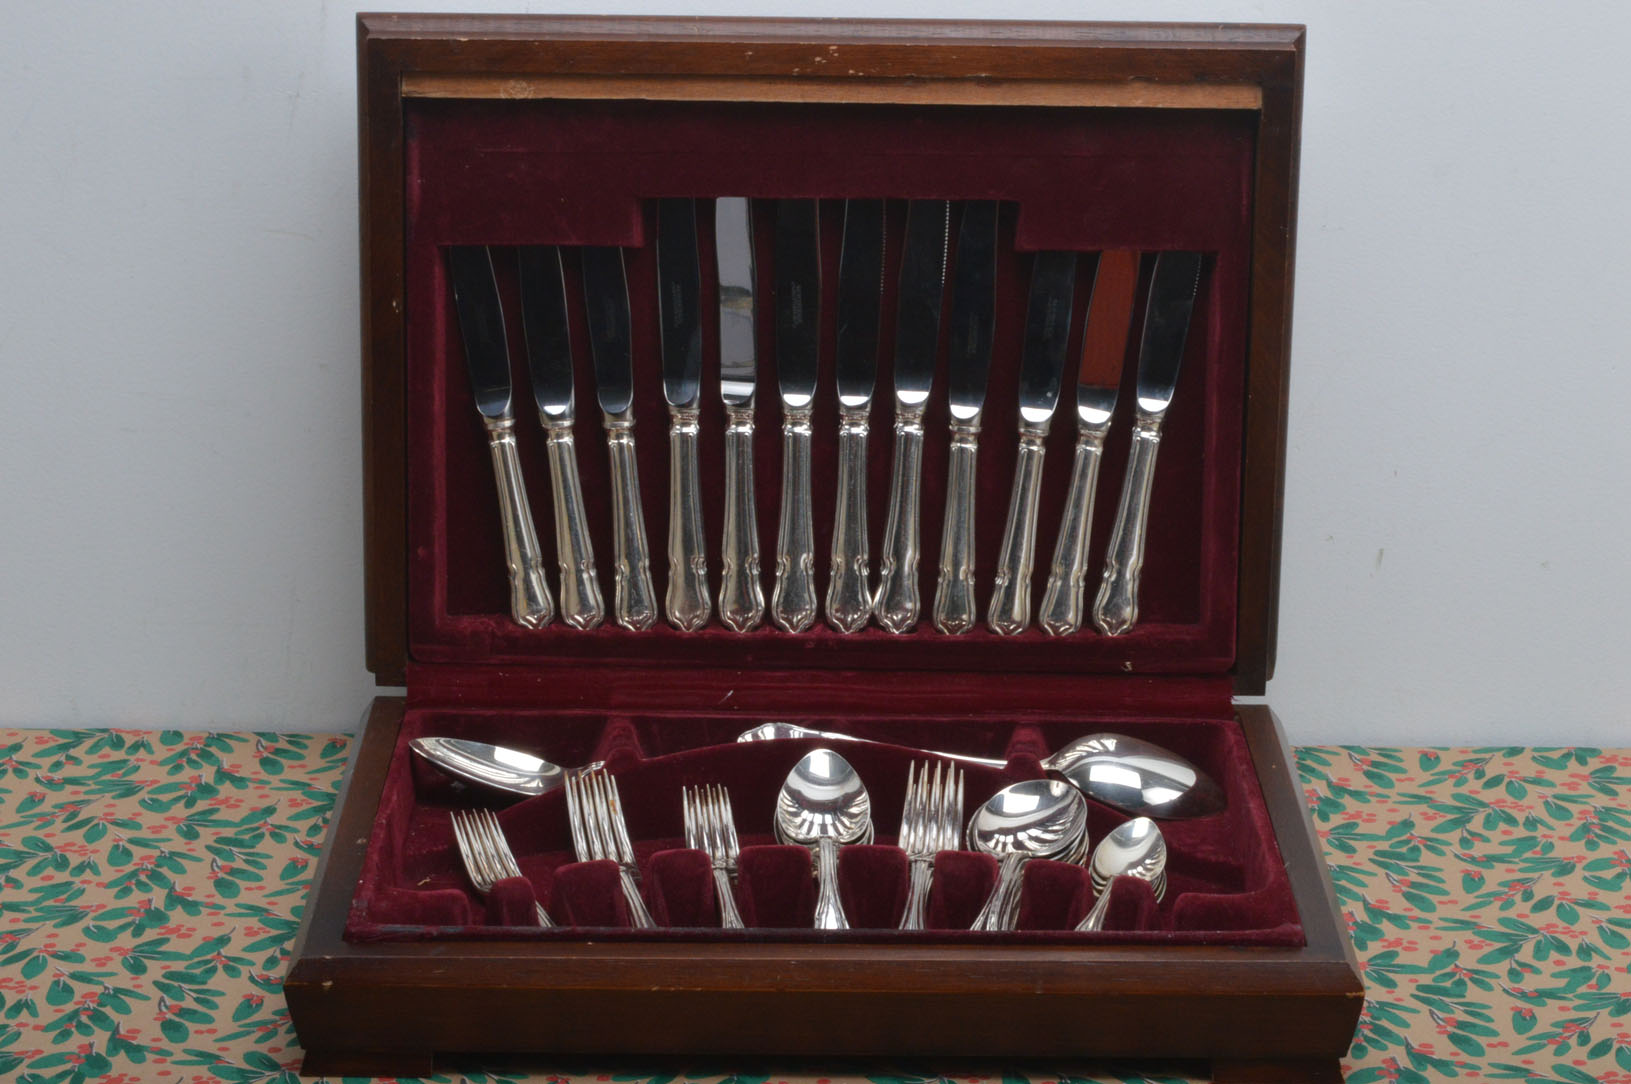 A cased set of Newbridge cutlery, for six, in a fitted wooden case